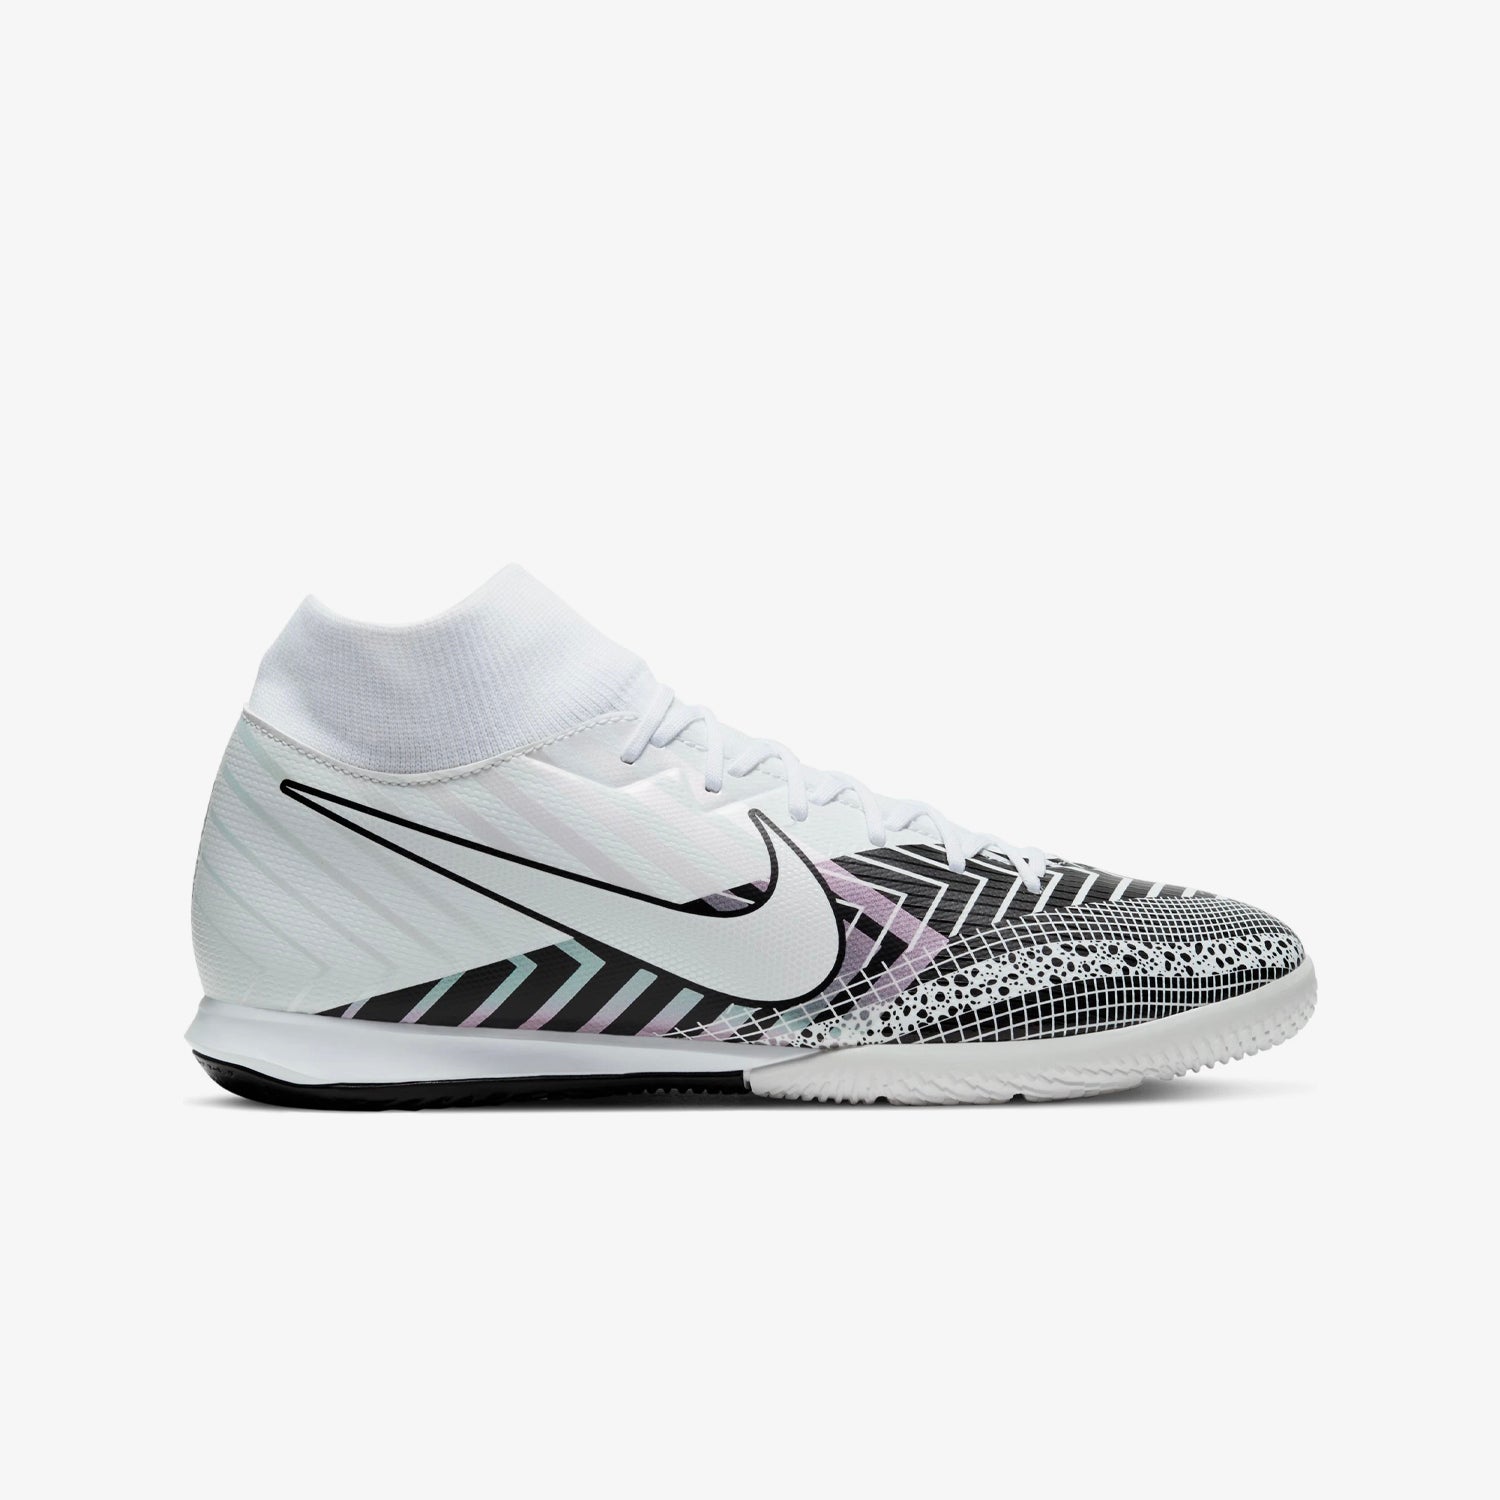 Nike Superfly 7 Academy Indoor Shoes | Nike Soccer